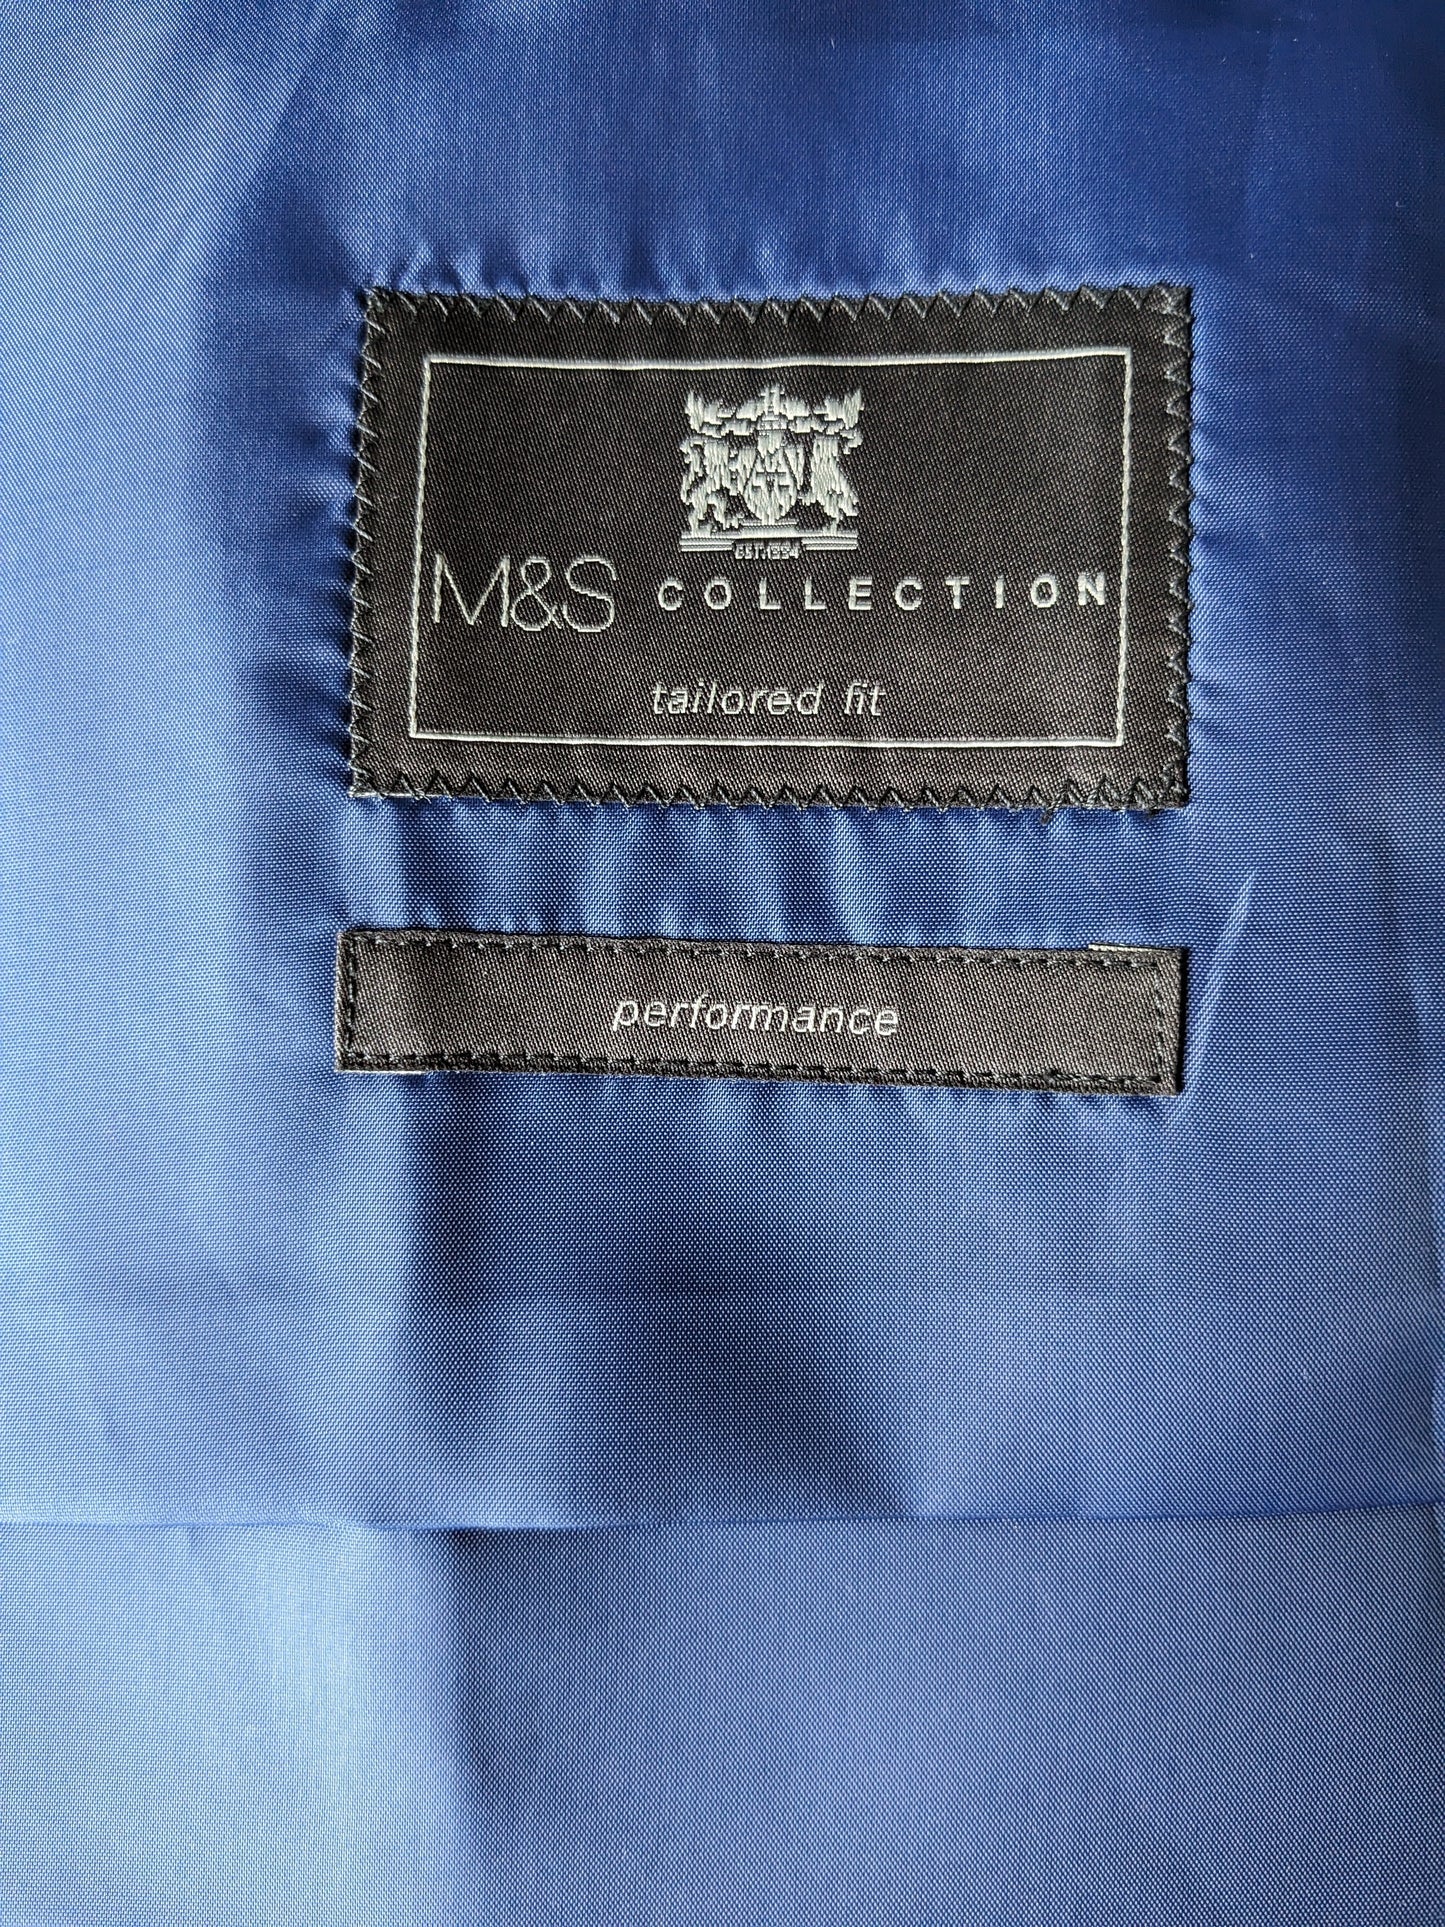 M&S Collection Wollen gilet. Grijs motief. Tailored Fit. Maat L. #326